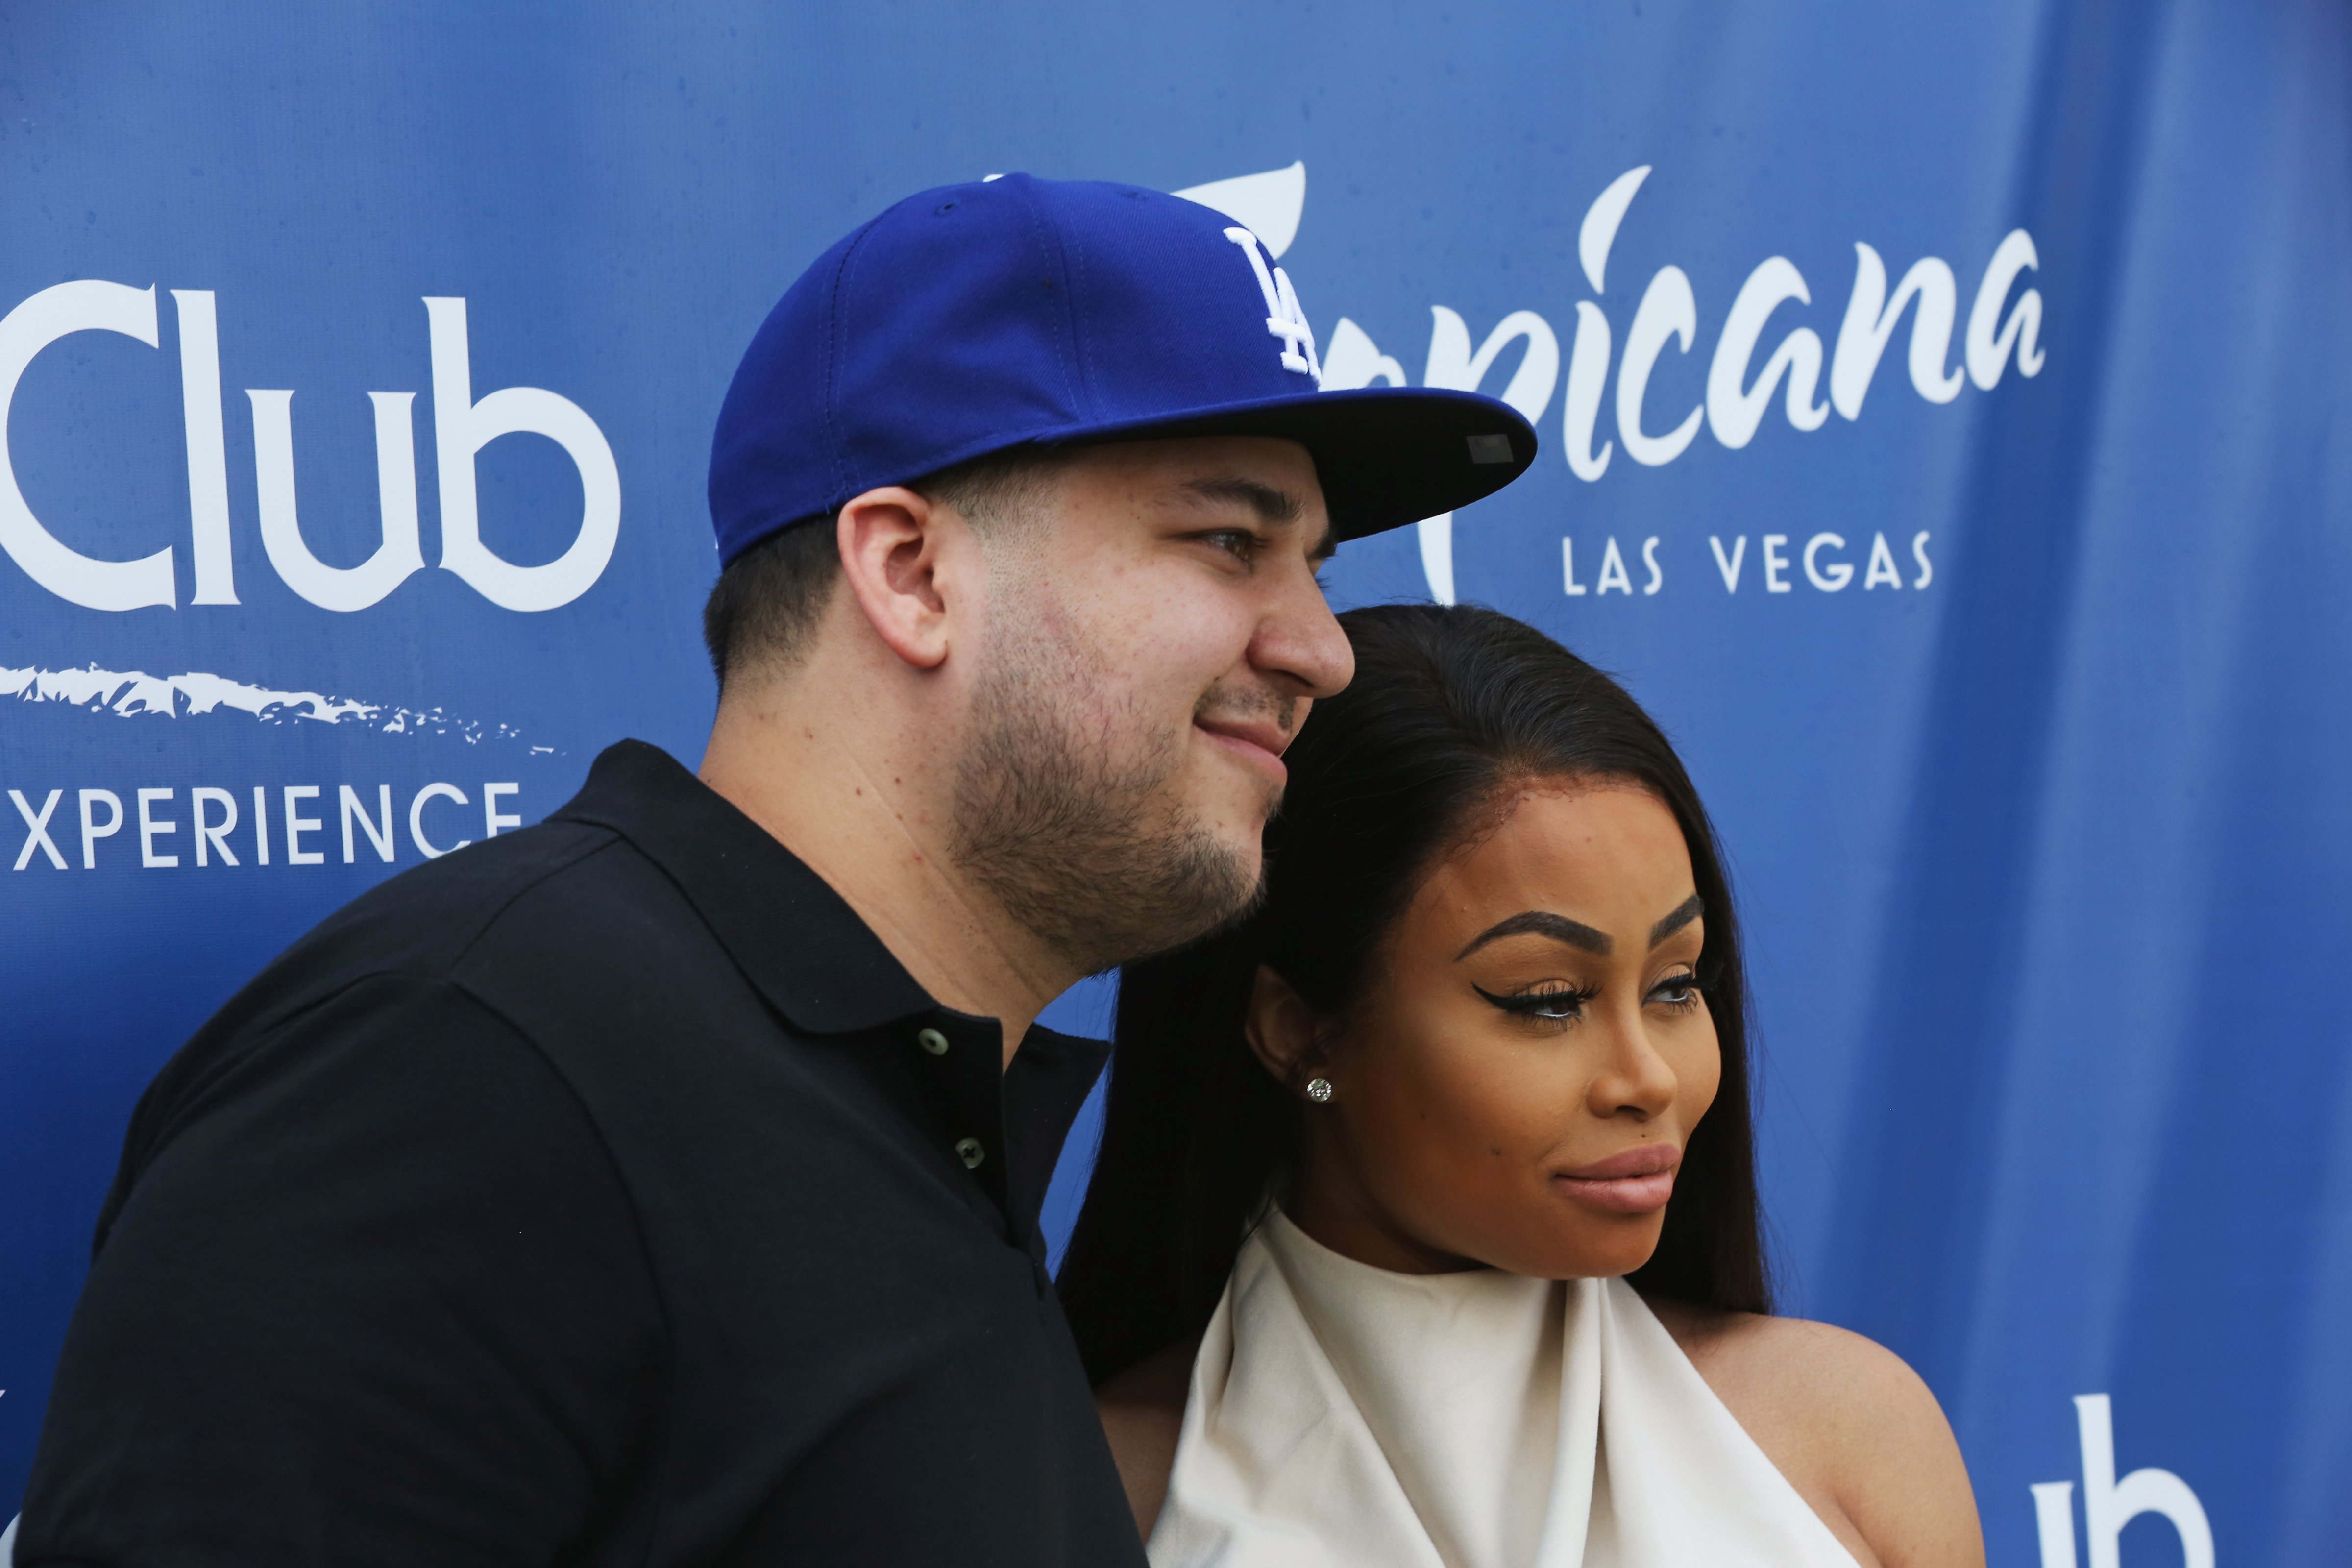 Television personality Rob Kardashian and model Blac Chyna attend the Sky Beach Club at the Tropicana Las Vegas on May 28, 2016 in Las Vegas, Nevada. (Gabe Ginsberg—Getty Images)